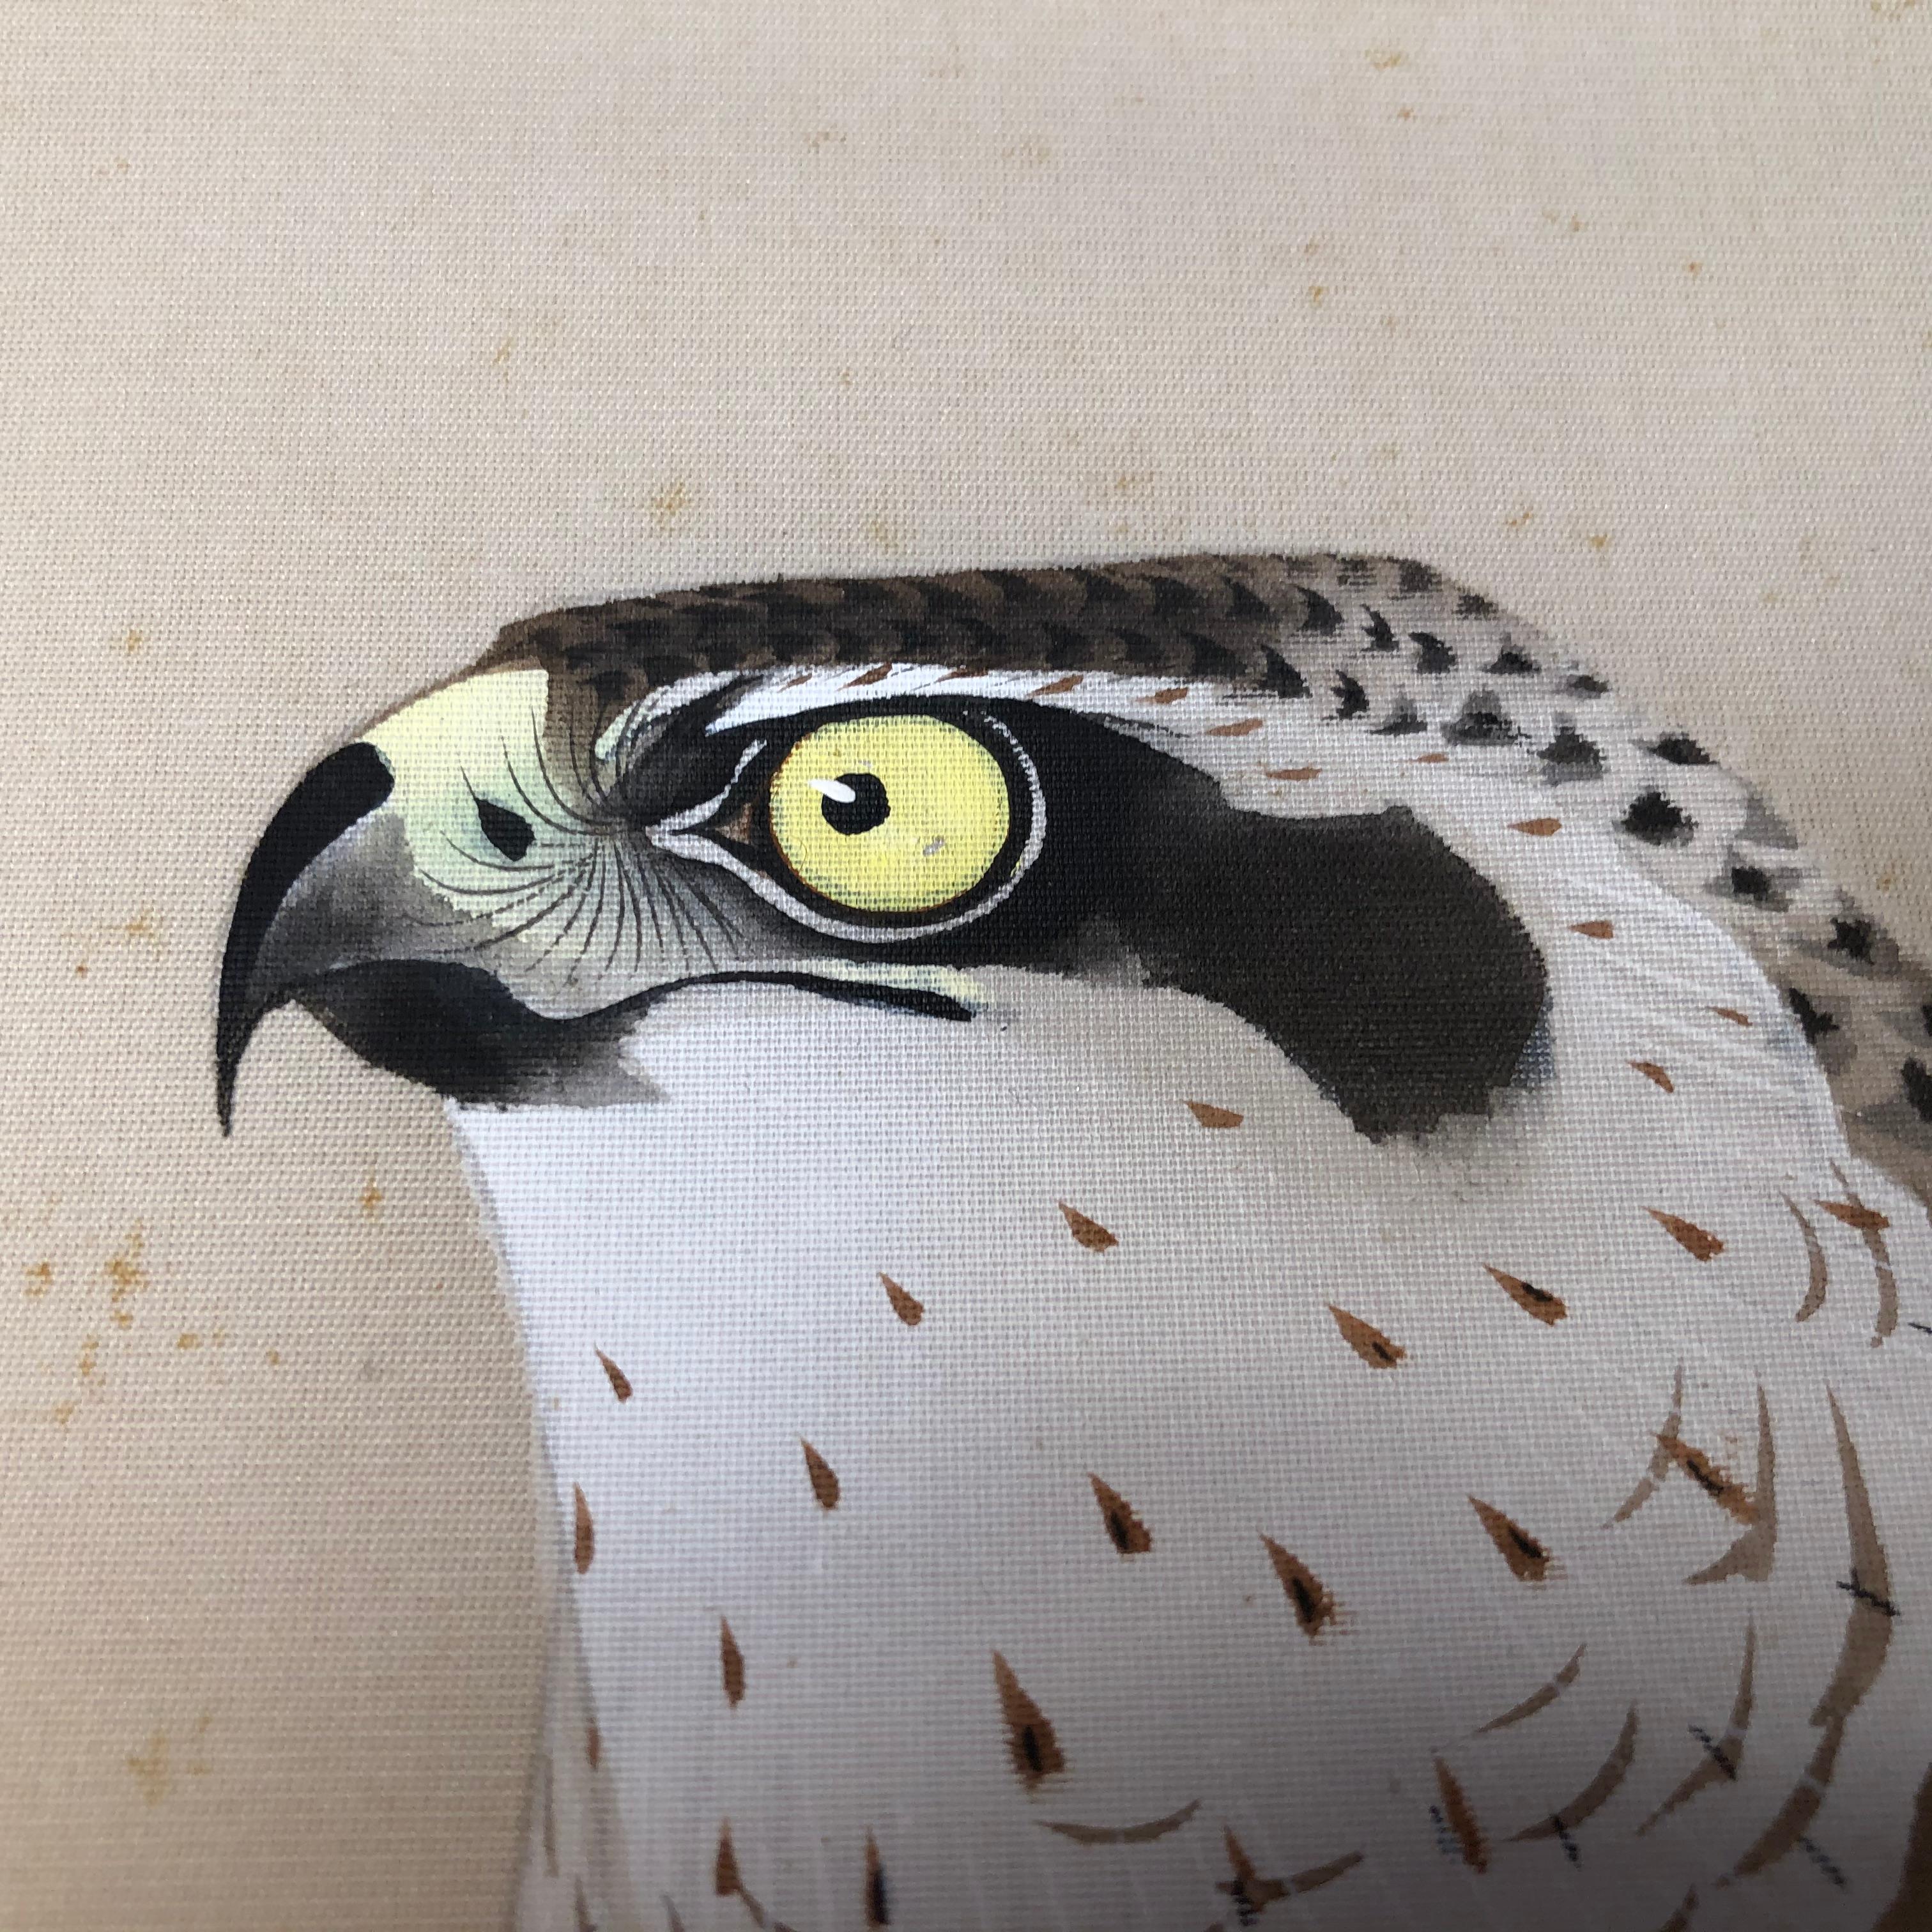 A Gem From Nature

A very fine and delicate Japanese antique entirely hand painted paper scroll of one of nature's king of soaring birds a hawk or eagle perched in an astute pose eyeing a watery body below as if ready for a strike. From circa